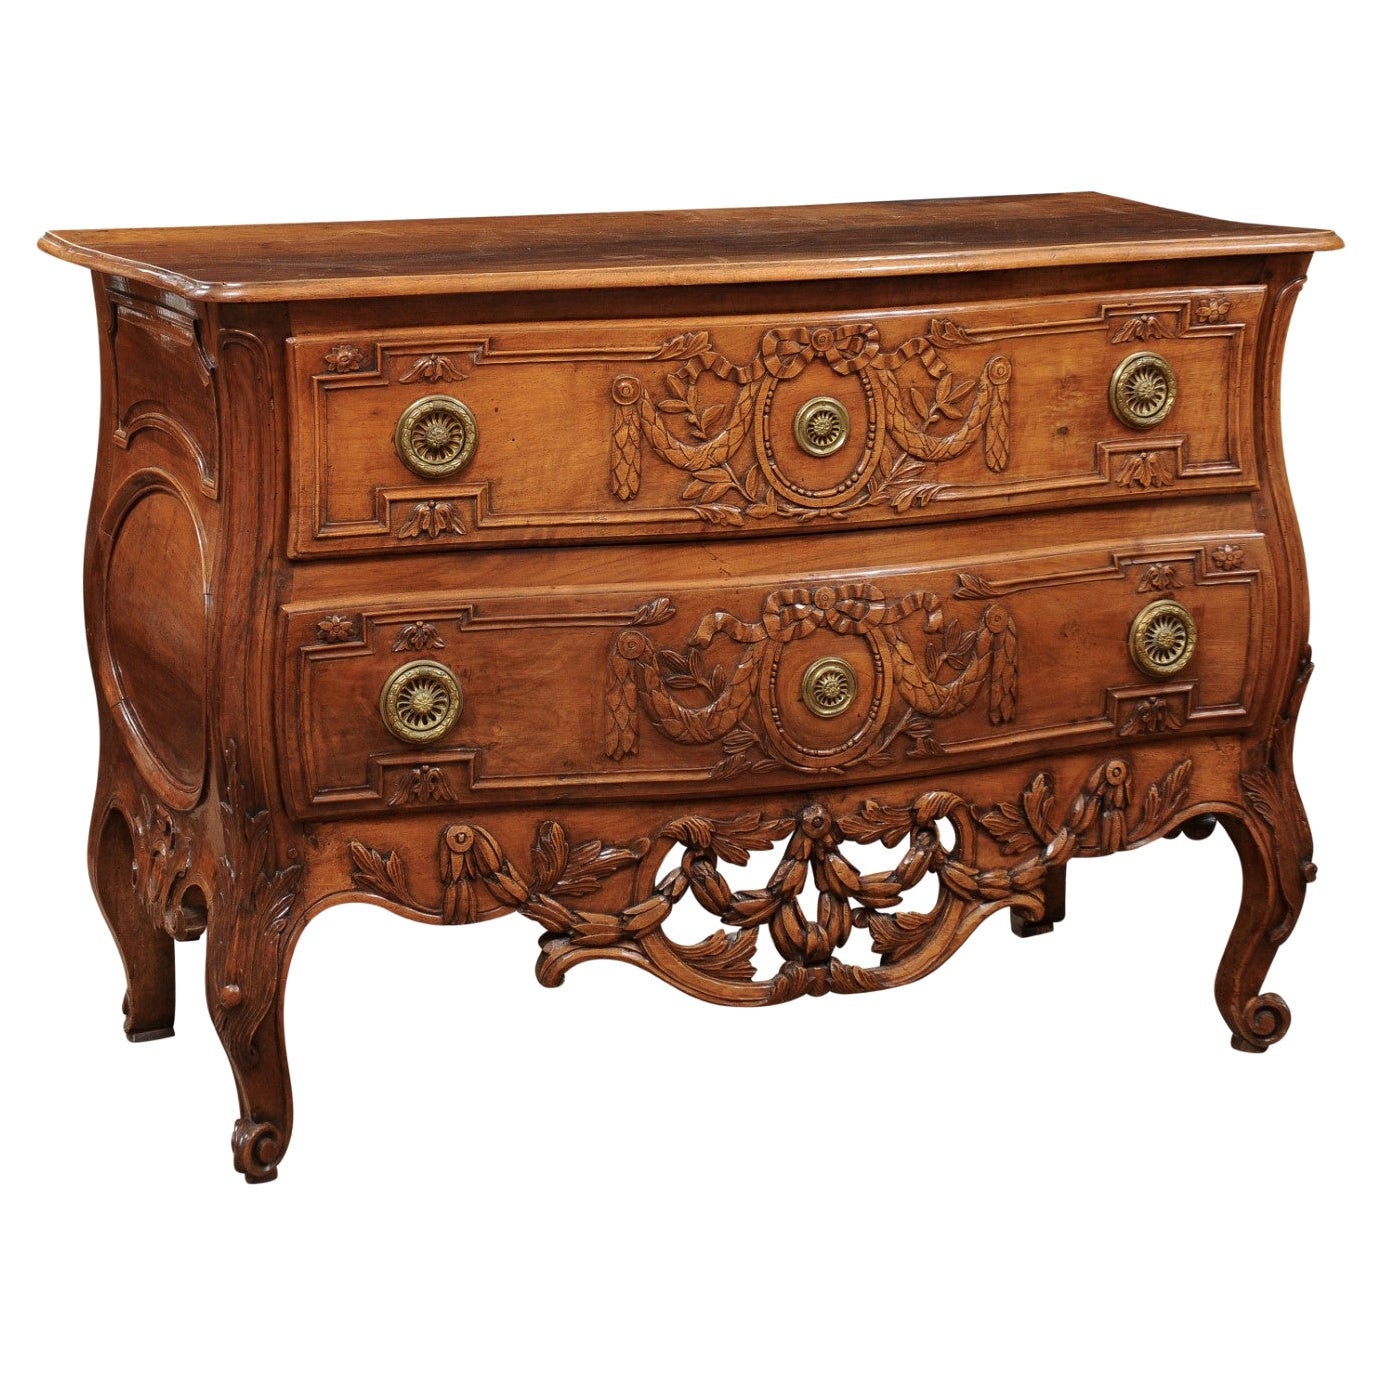 Transitional Louis XV/XVI Walnut Commode with Pierced Apron & Cabriole Legs For Sale